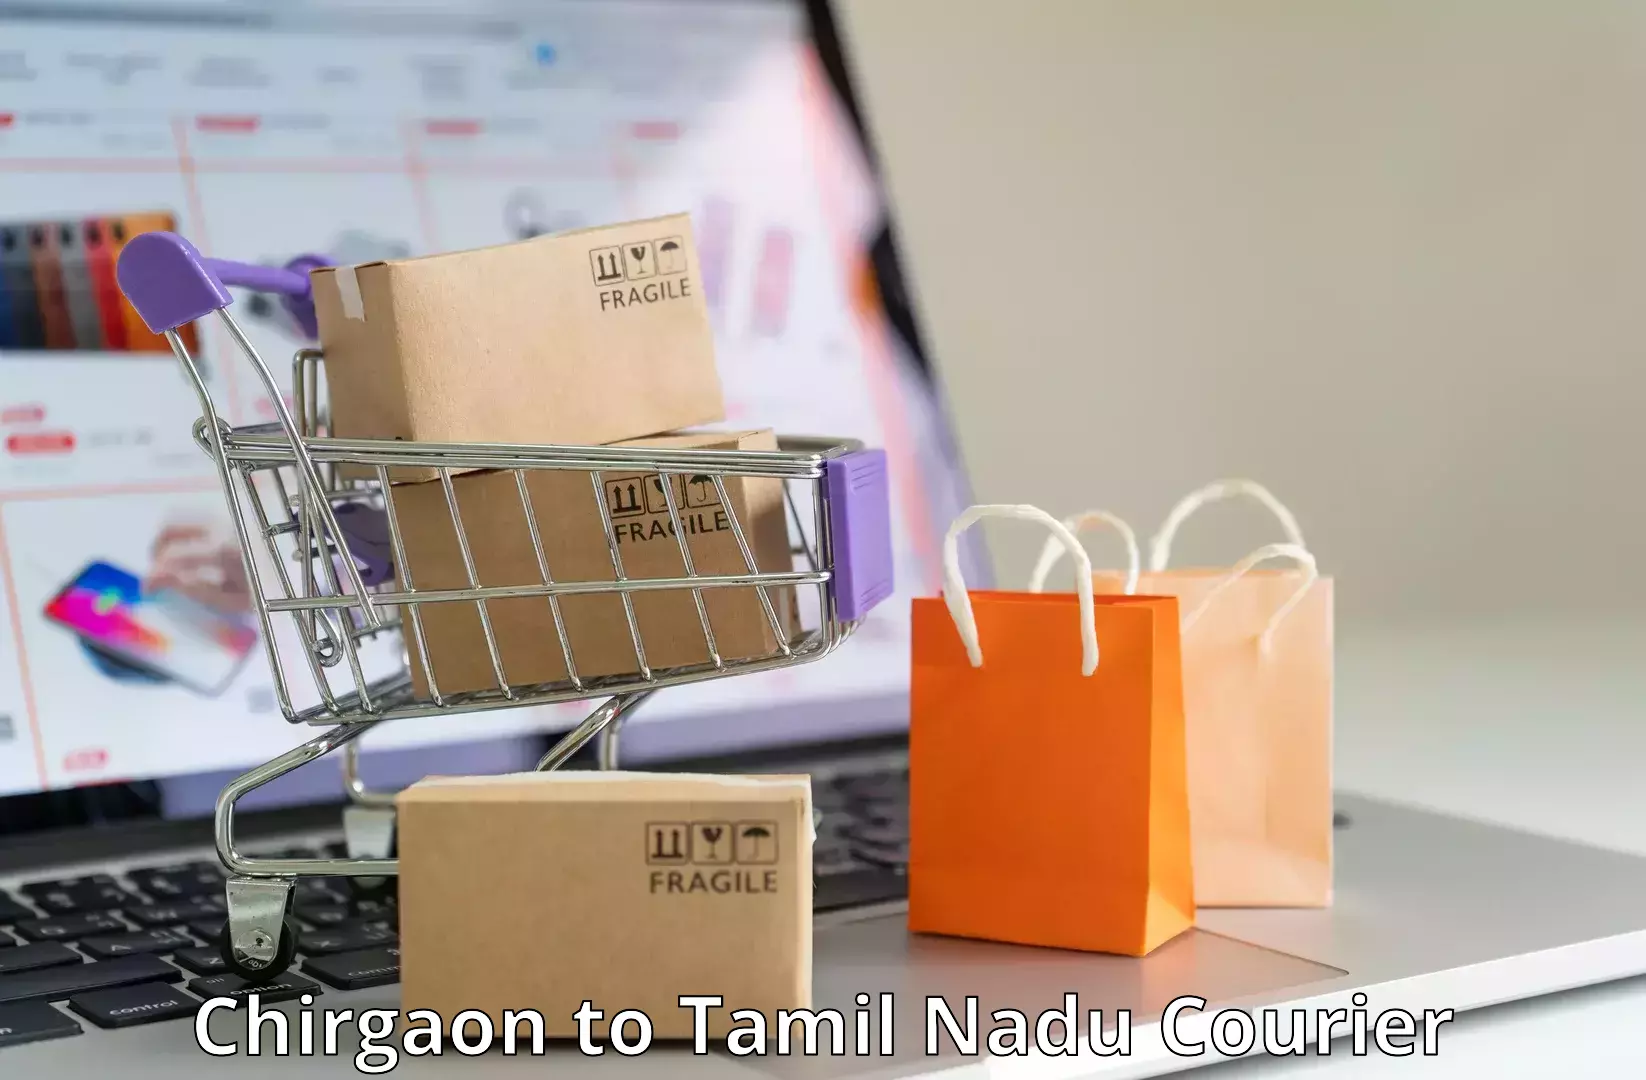 Modern delivery technologies in Chirgaon to Trichy